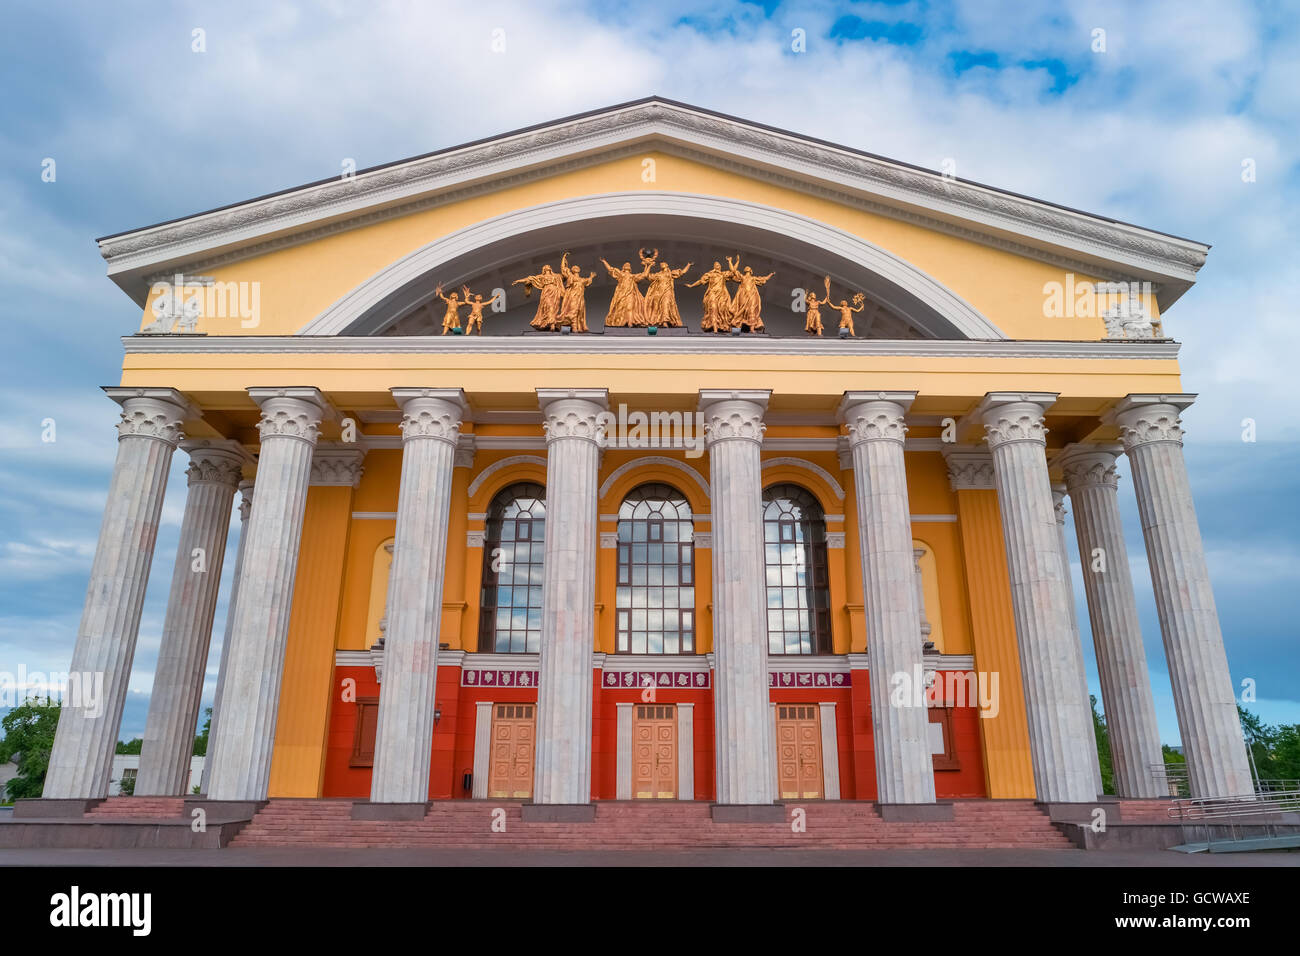 Republic of Karelia Musical Theater, Petrozavodsk, Russia. Most beautiful and famous building in Petrozavodsk. Stock Photo